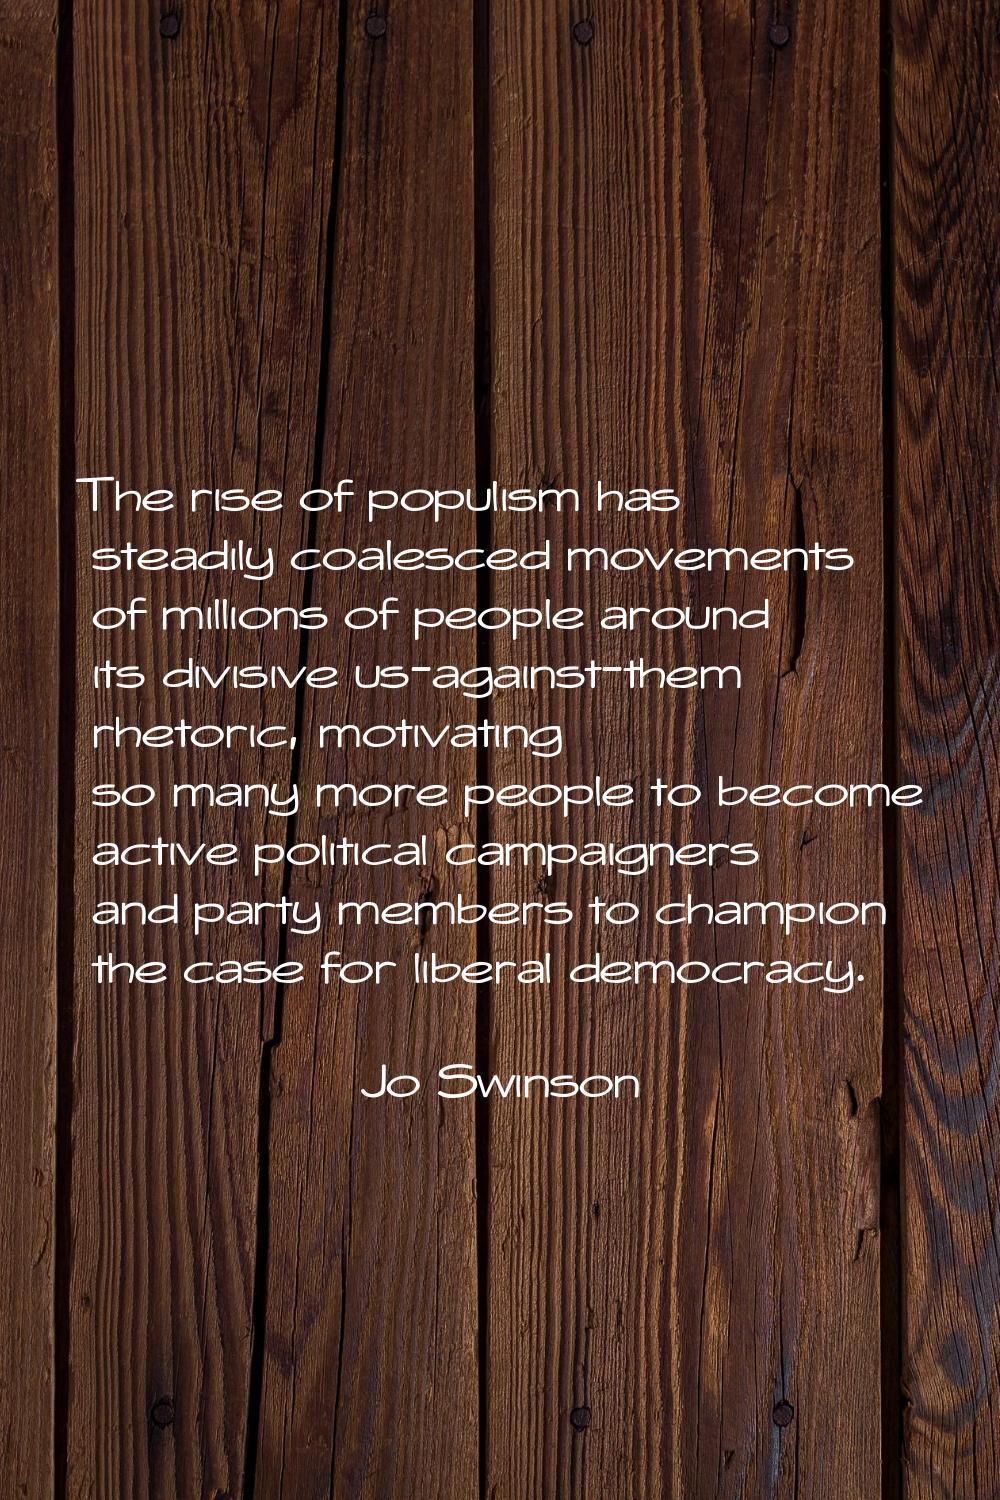 The rise of populism has steadily coalesced movements of millions of people around its divisive us-